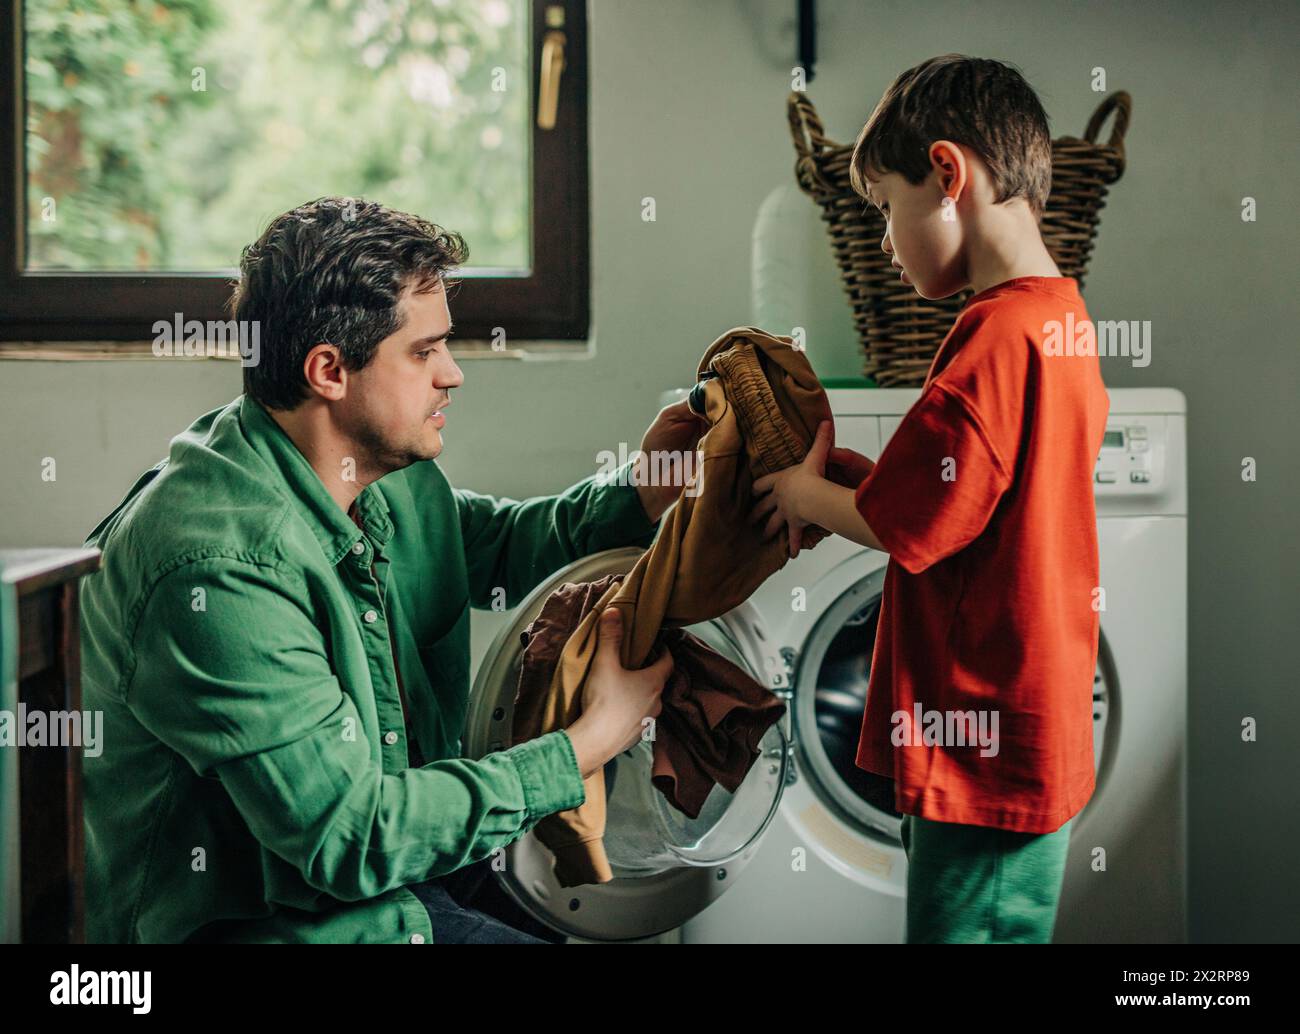 Father and son removing clothes from washing machine at home Stock Photo